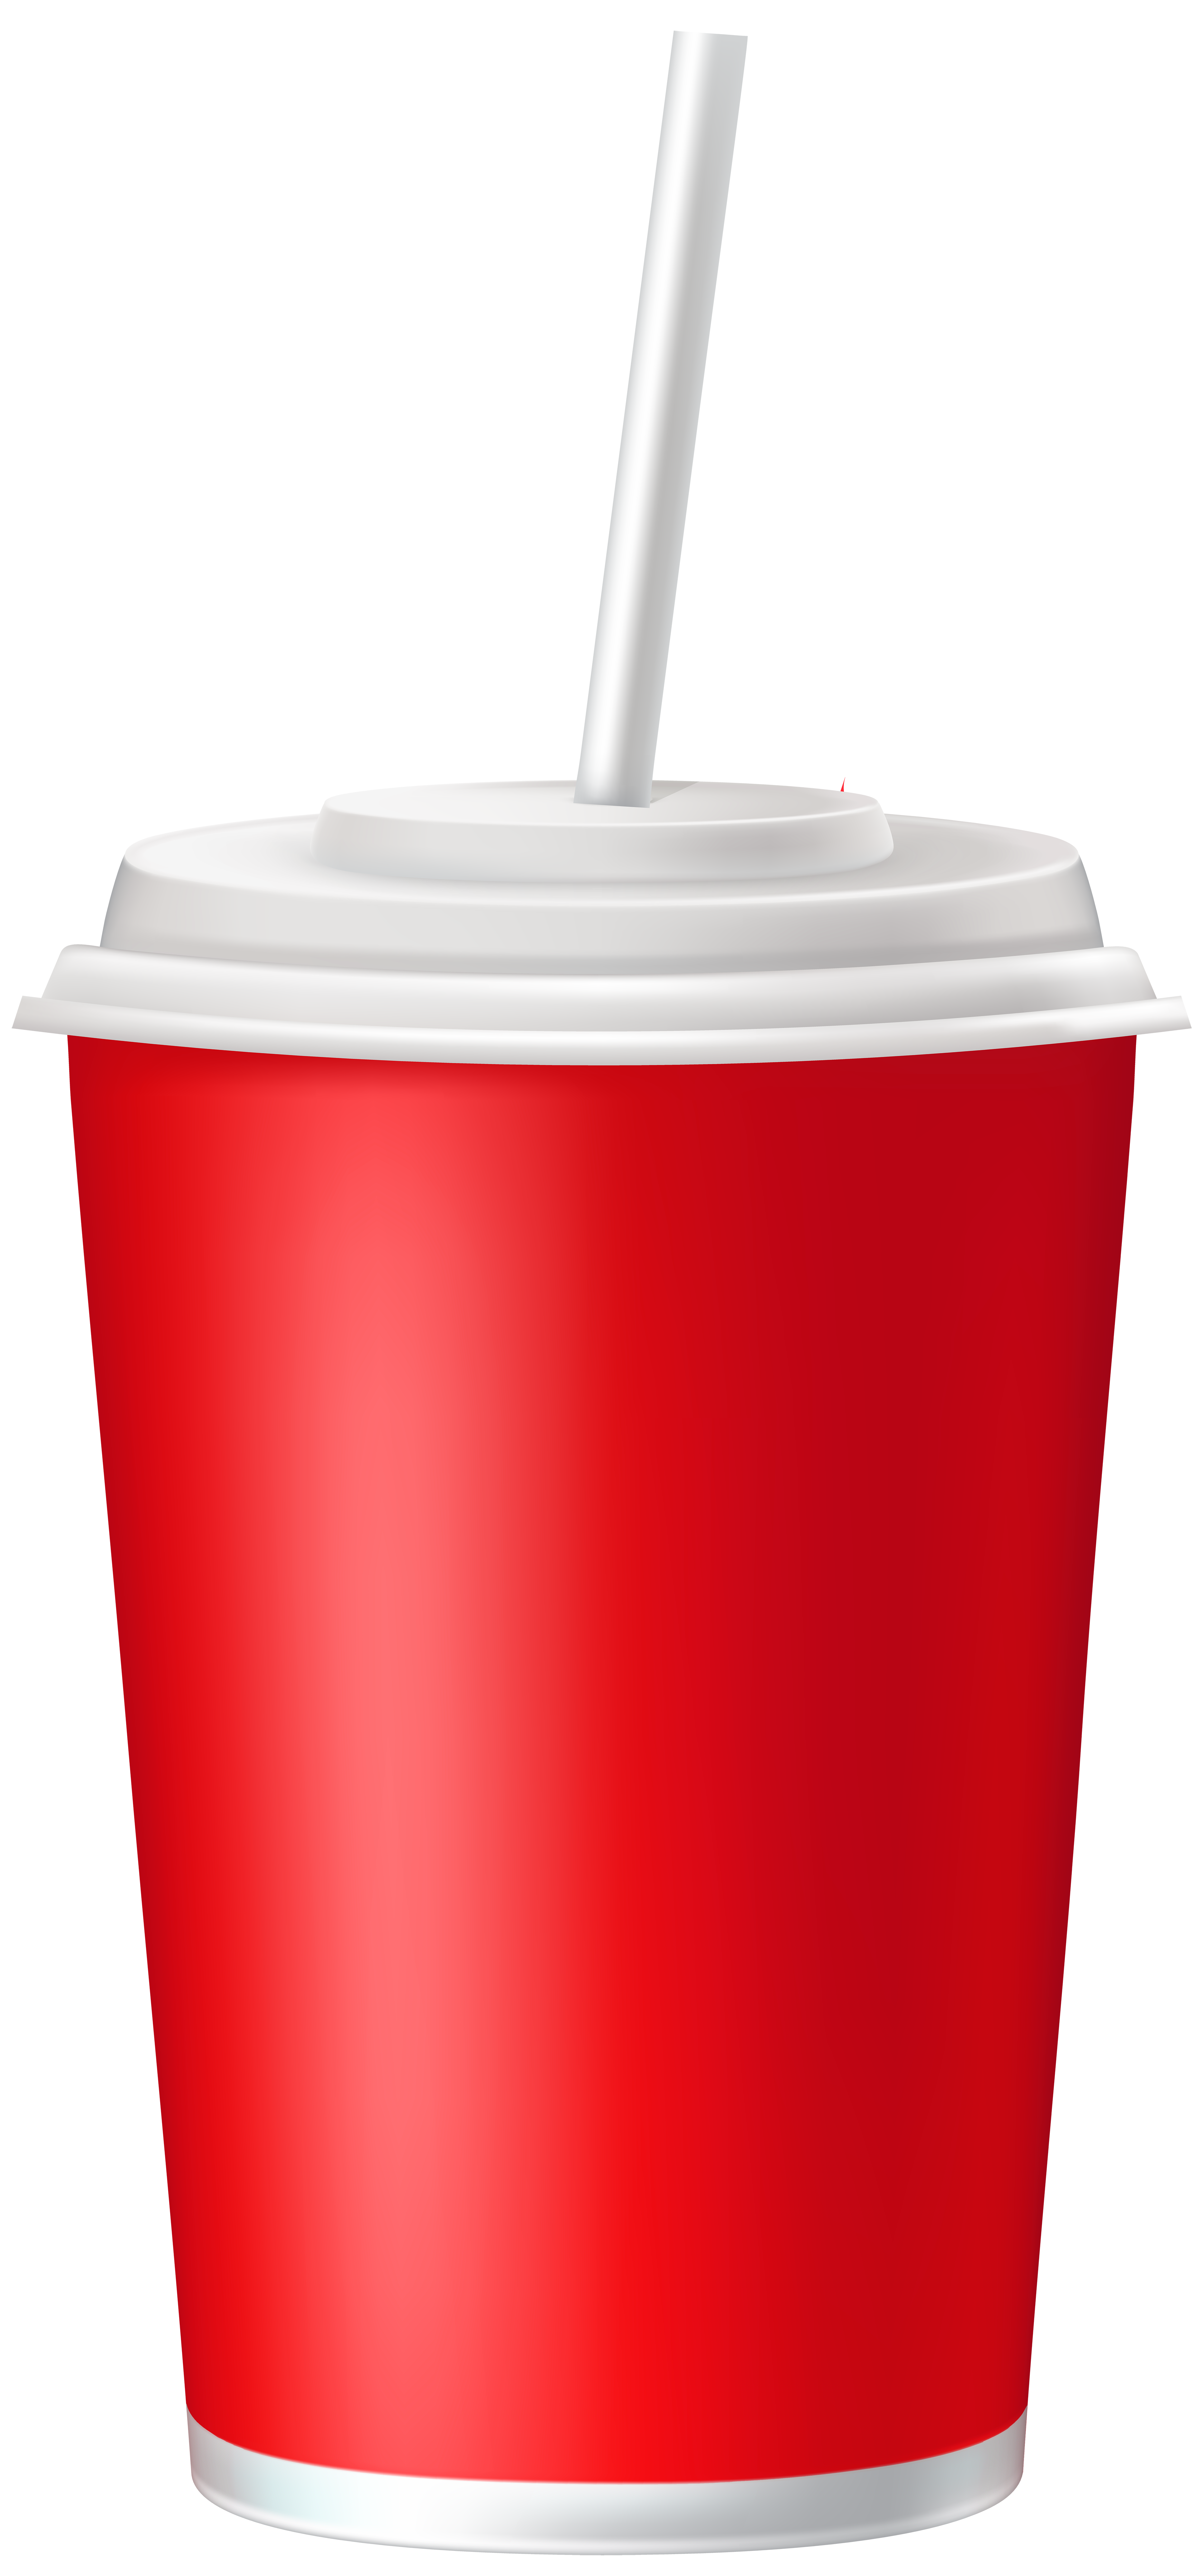 Plastic with straw png. Clipart cup plastics